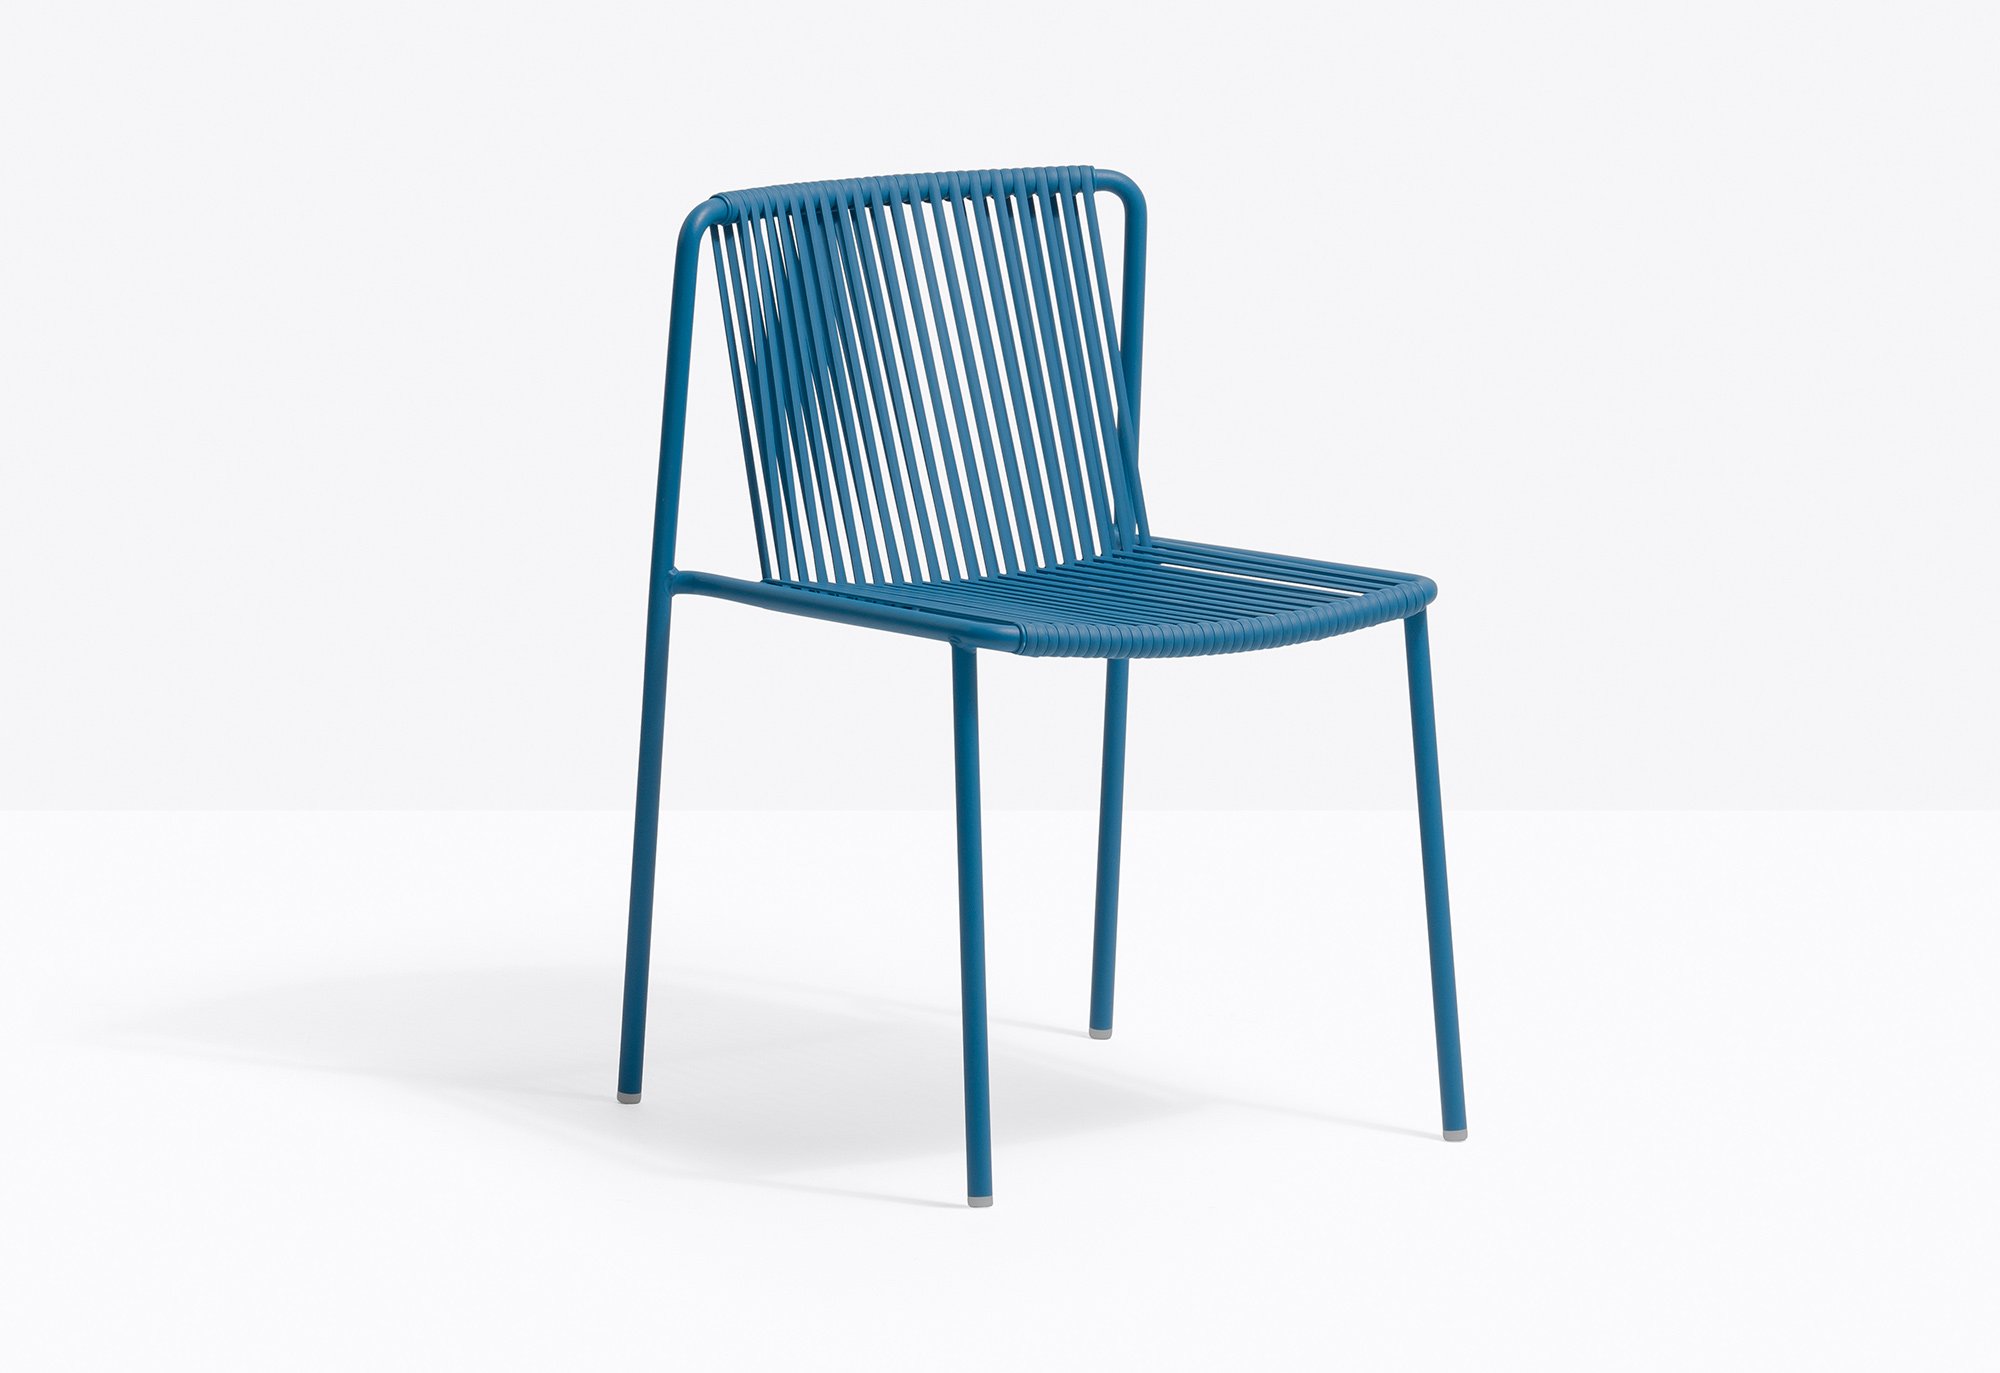 Tribeca Chair from Pedrali, designed by CMP Design